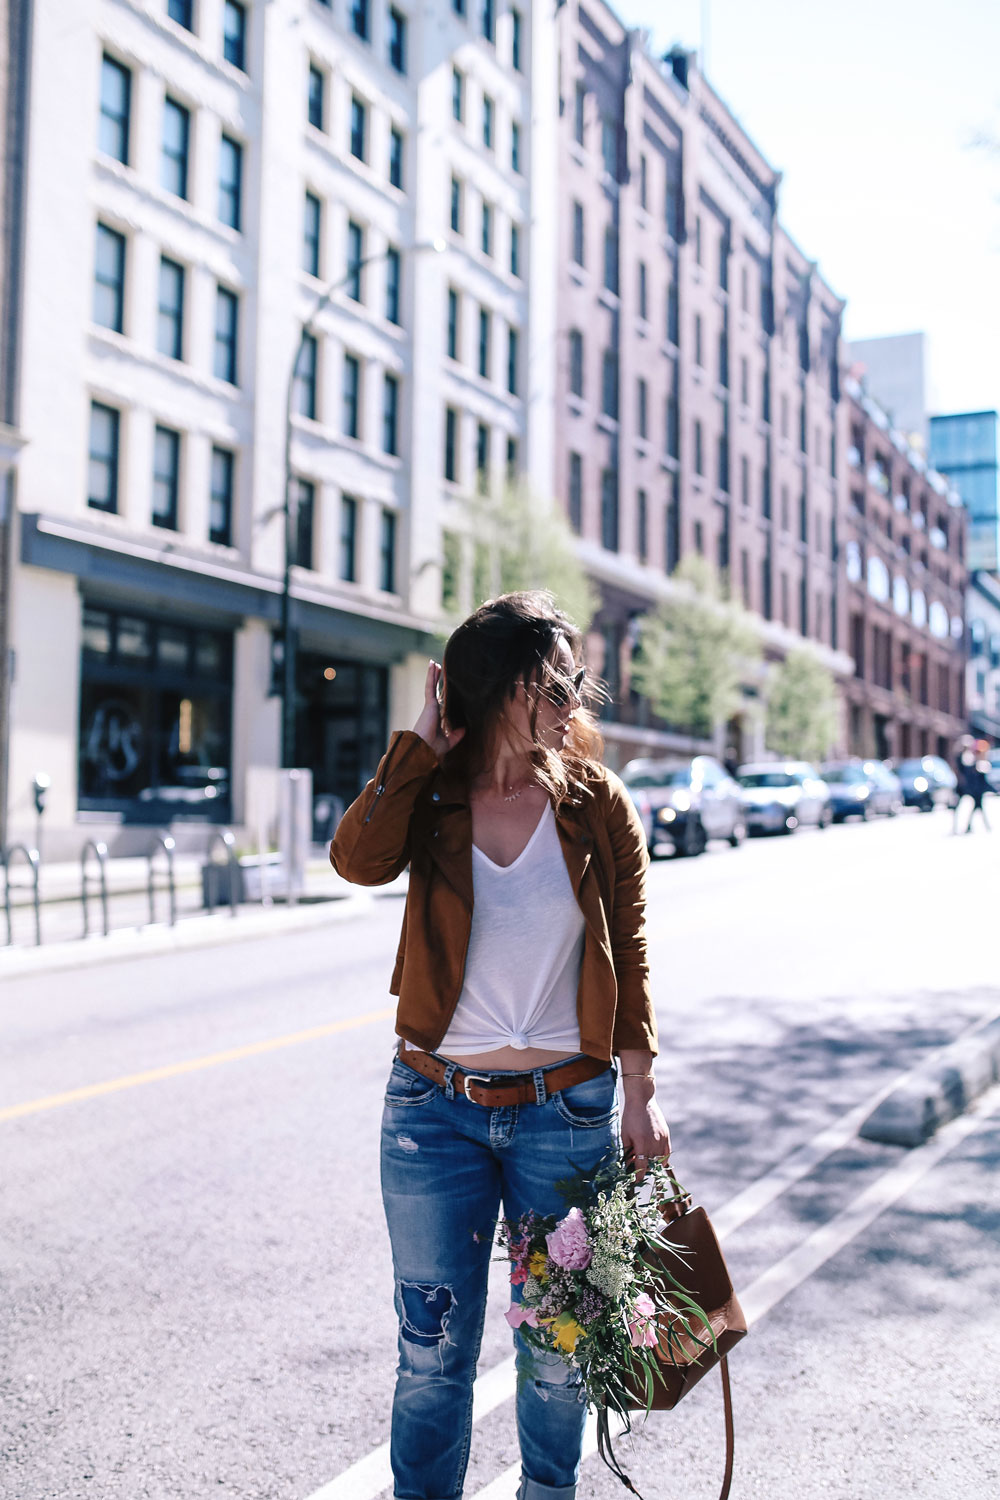 how to wear boyfriend jeans, casual outfit ideas in jcrew heels, mavi t shirt, aritzia auxiliary bag, suede moto jacket outfit ideas, revolve suede jacket, silver jeans boyfriend jeans, casual weekend outfit ideas by To Vogue or Bust